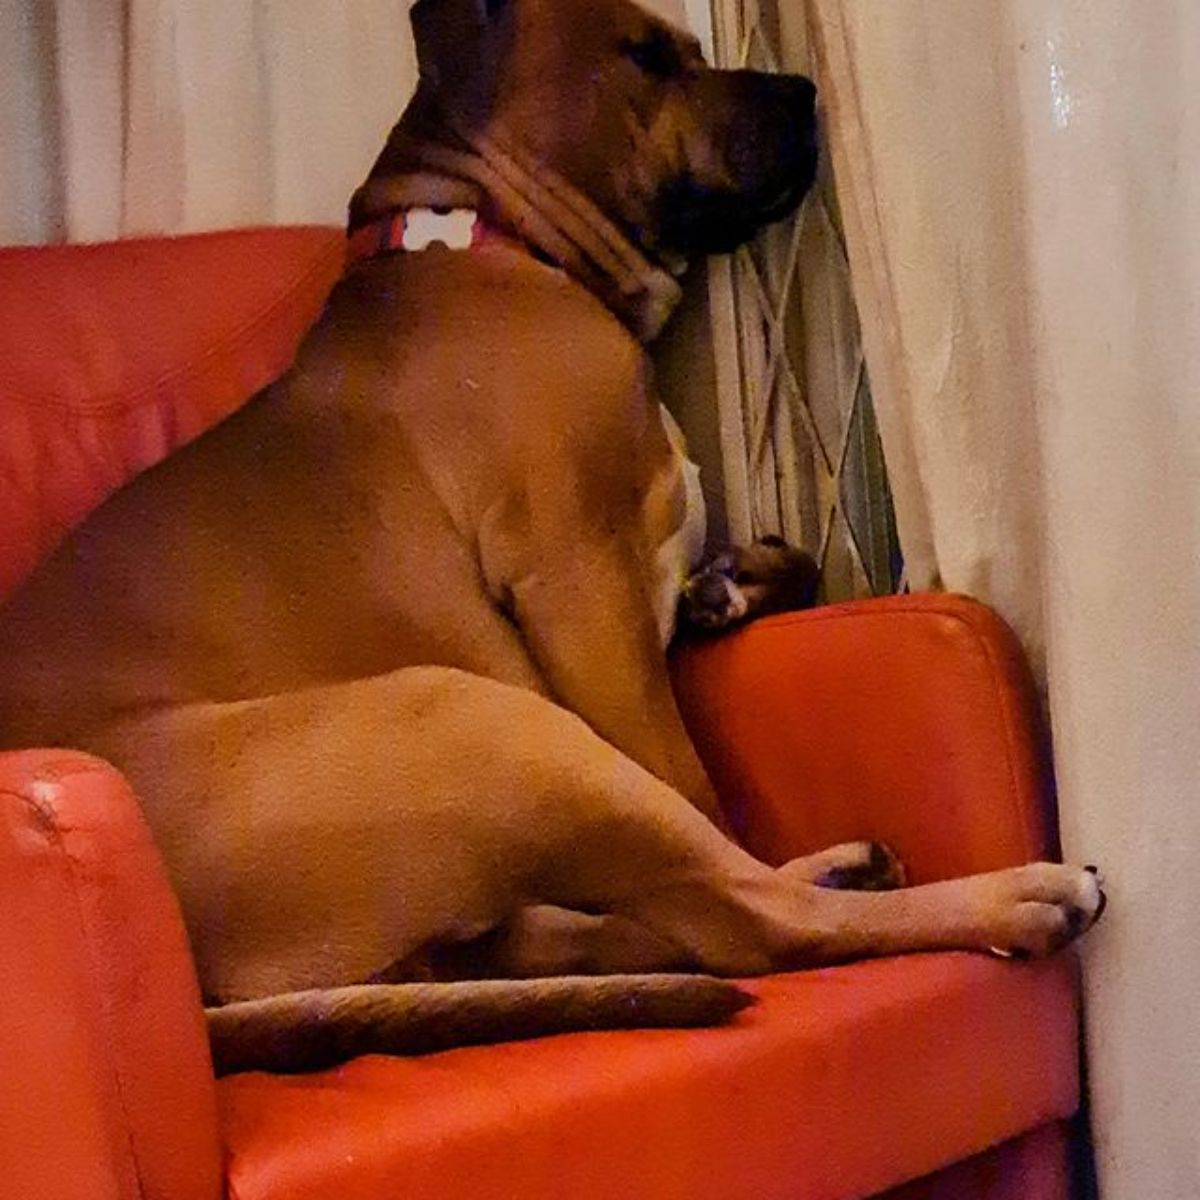 brown dog sitting on a red chair and pekeing through curtains out a window